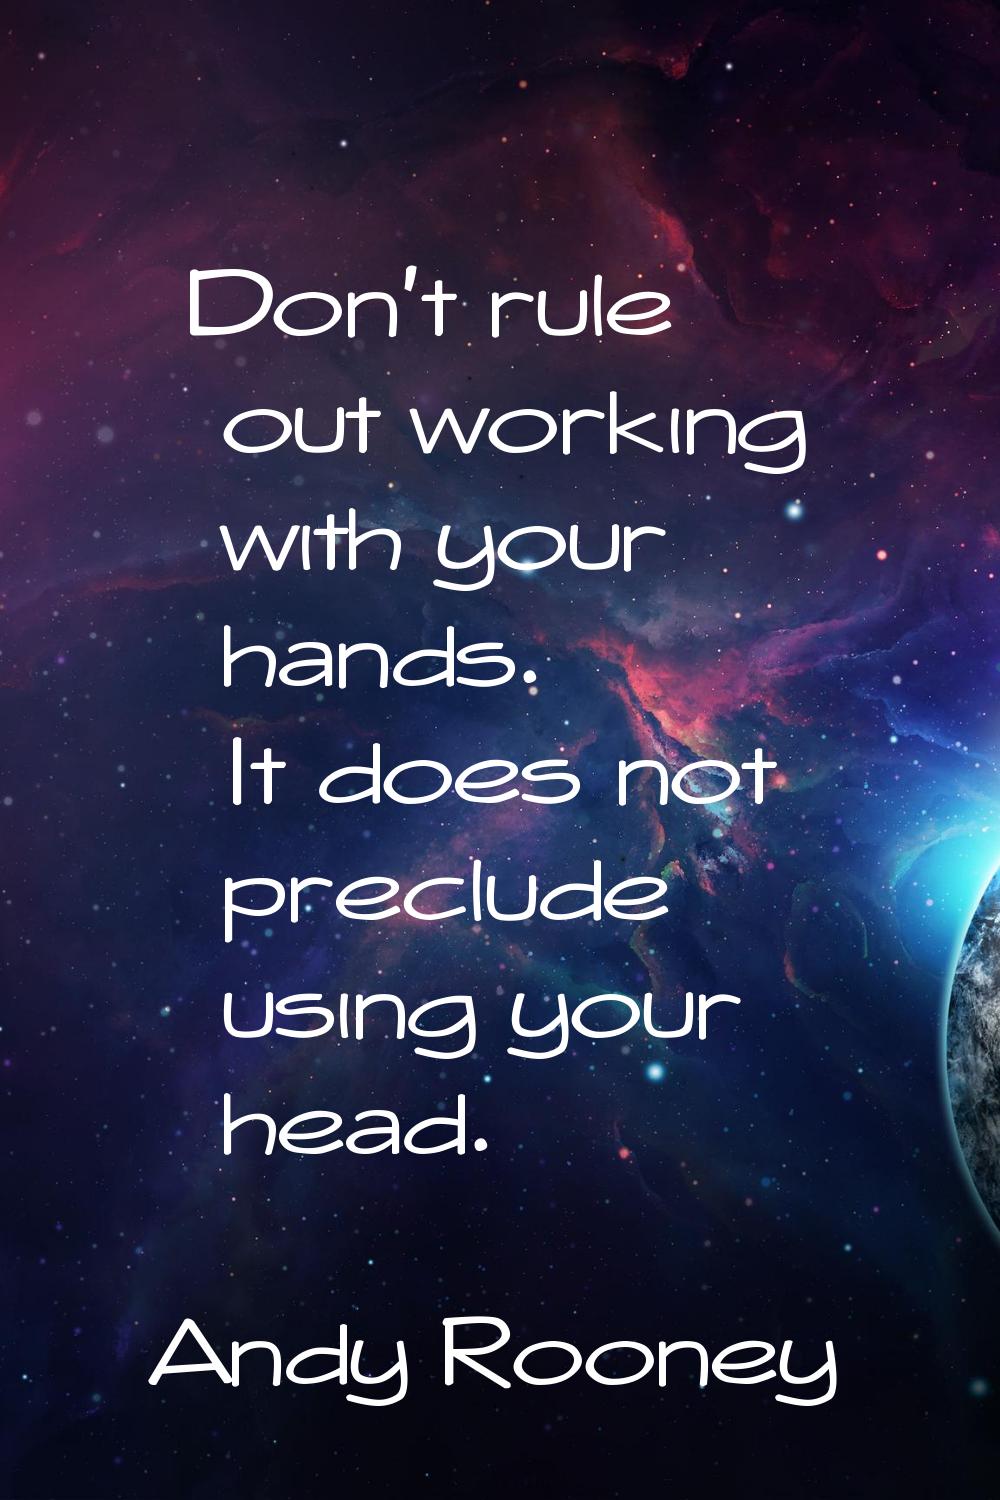 Don't rule out working with your hands. It does not preclude using your head.